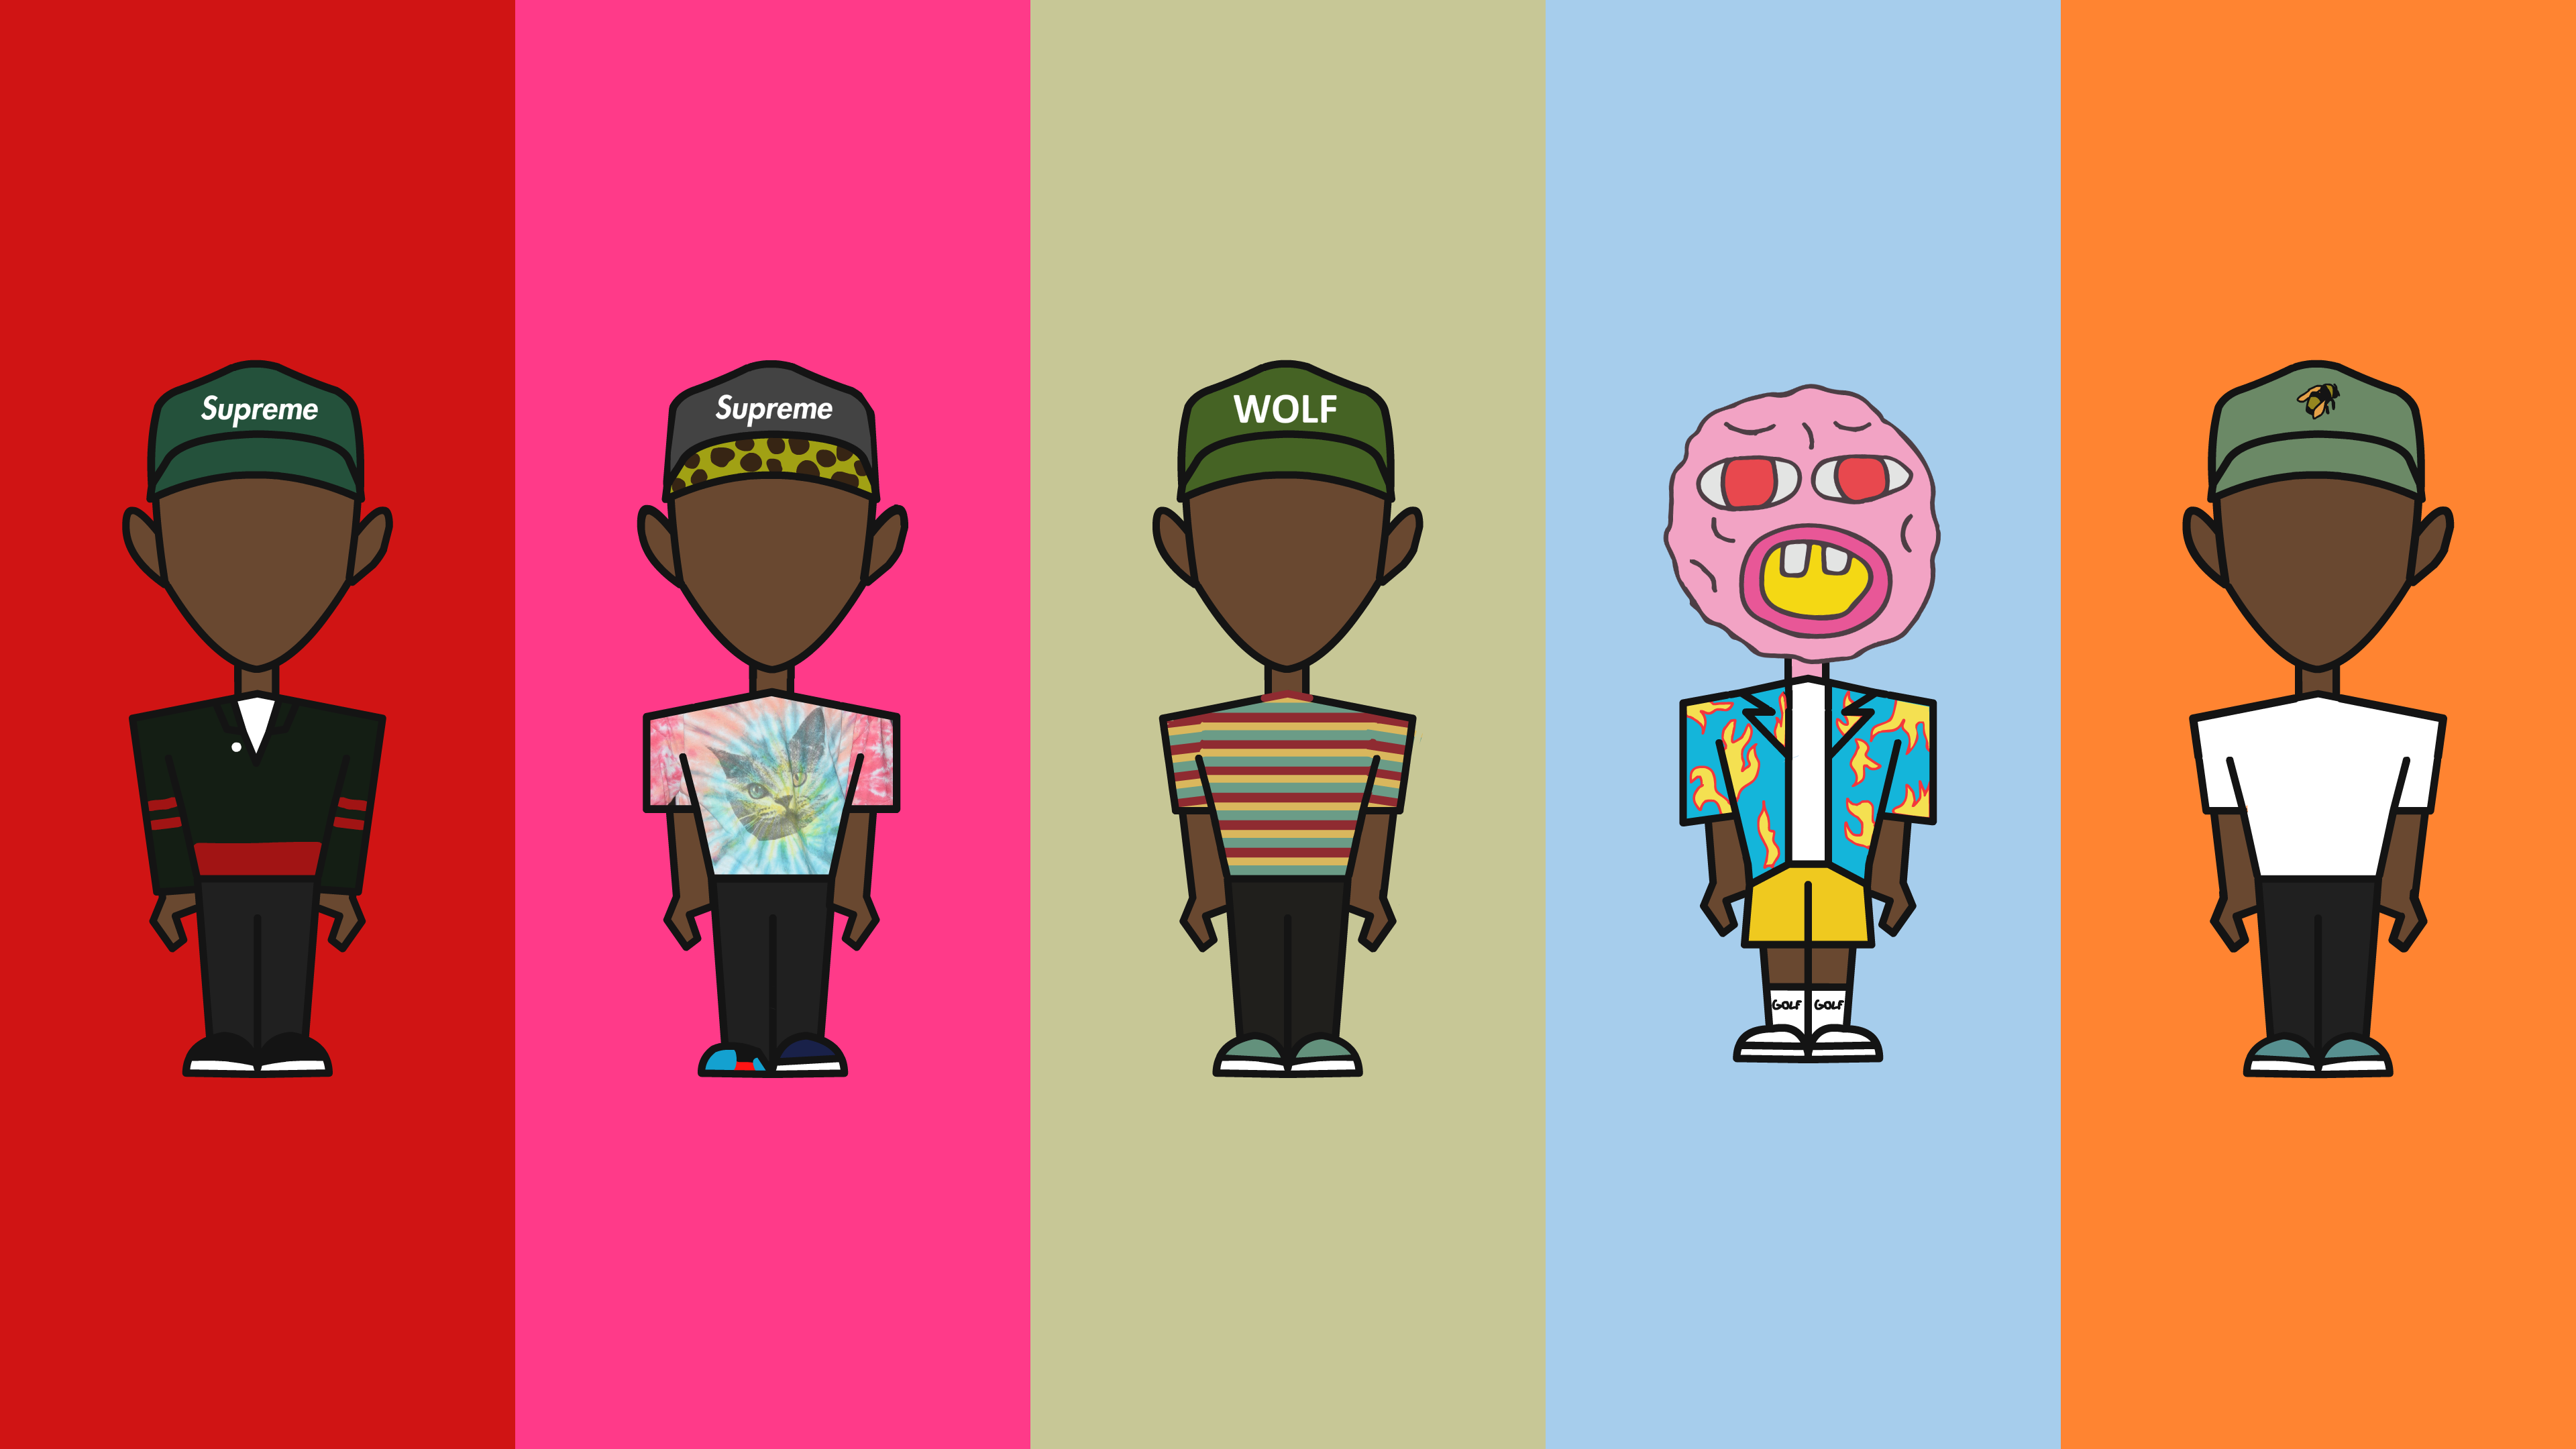 I've recreated the iconic Kanye wallpaper with Tyler, the Creator's albums! Enjoy!